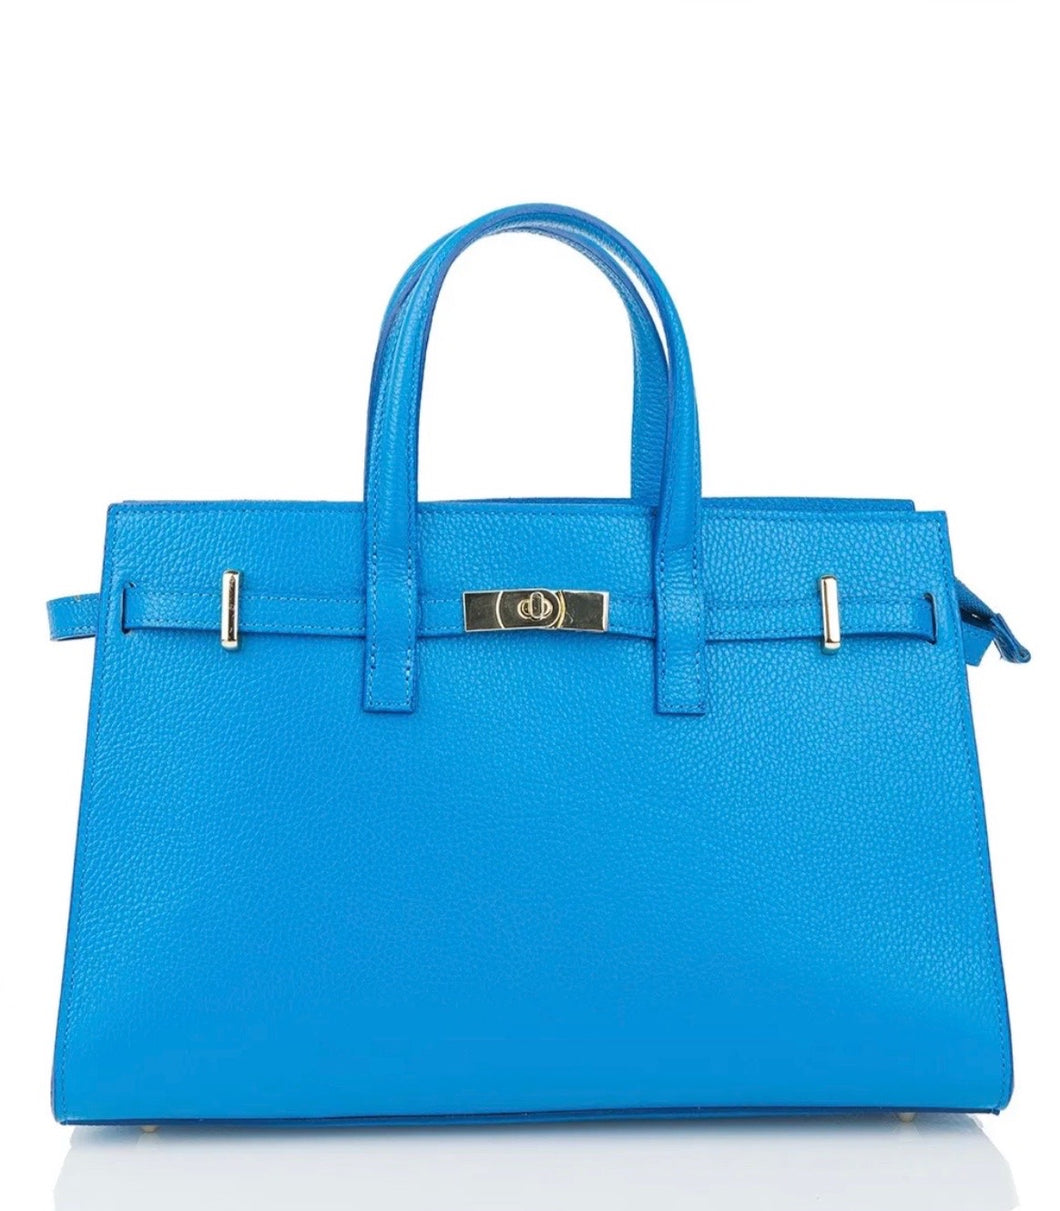 Lexi Turquoise Leather Hand Bag